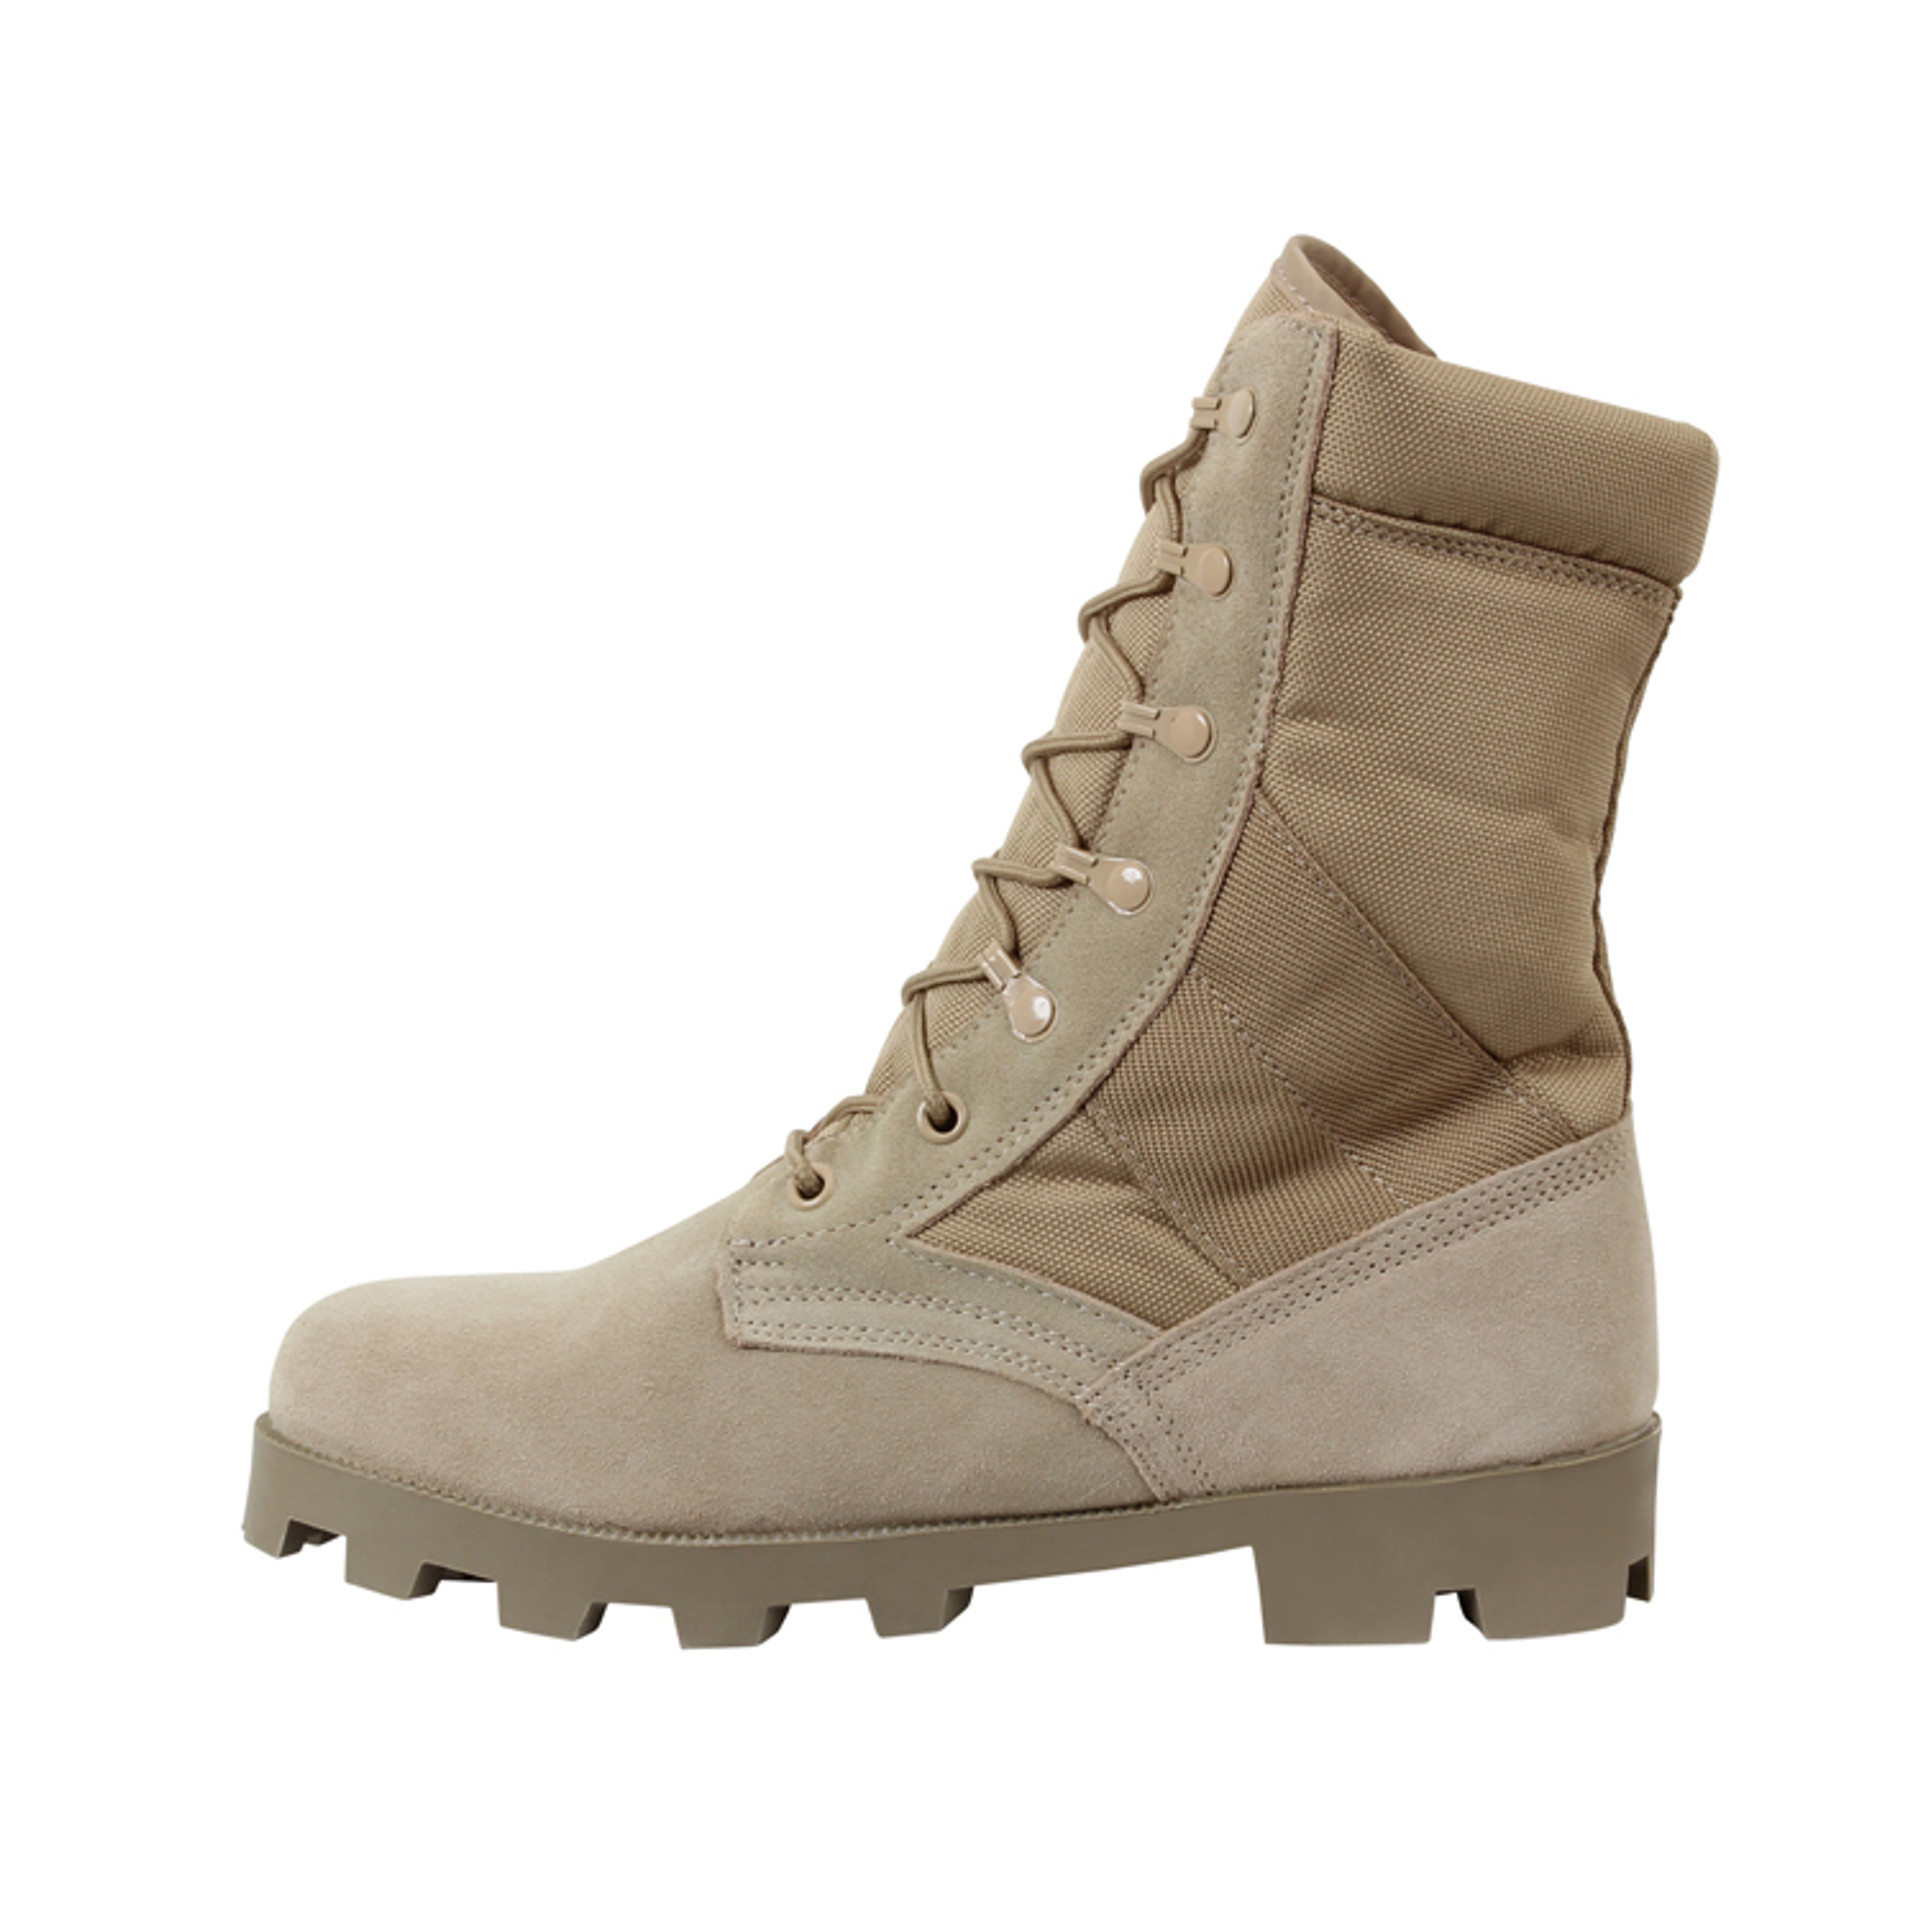 Shop Kids Army Desert Boots - Fatigues Army Navy Gear